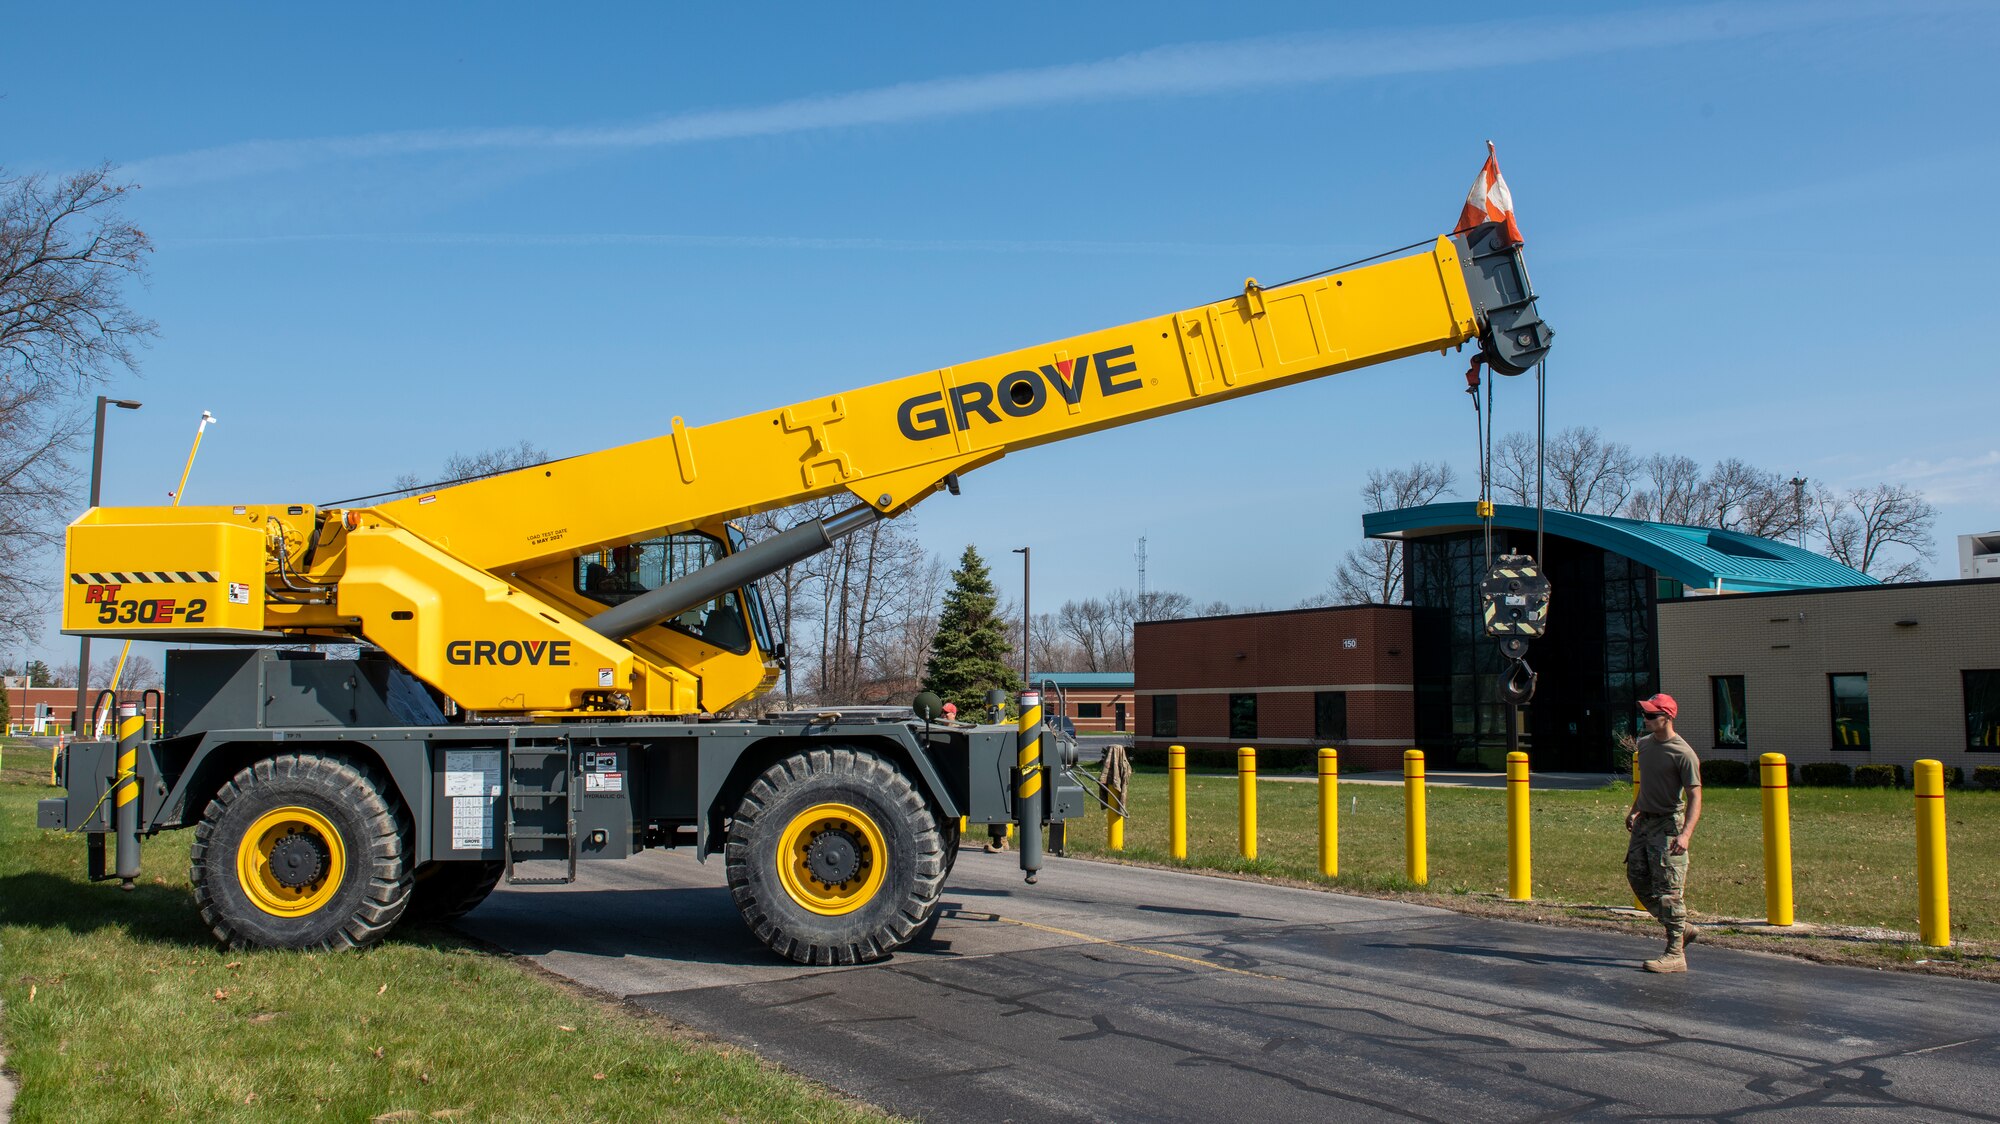 Airmen, assigned to the Ohio Air National Guard’s 200th RED HORSE, move a crane into position during Crash Damaged/Disabled Aircraft Recovery training April 23, 2022 at the 180th Fighter Wing in Swanton, Ohio.